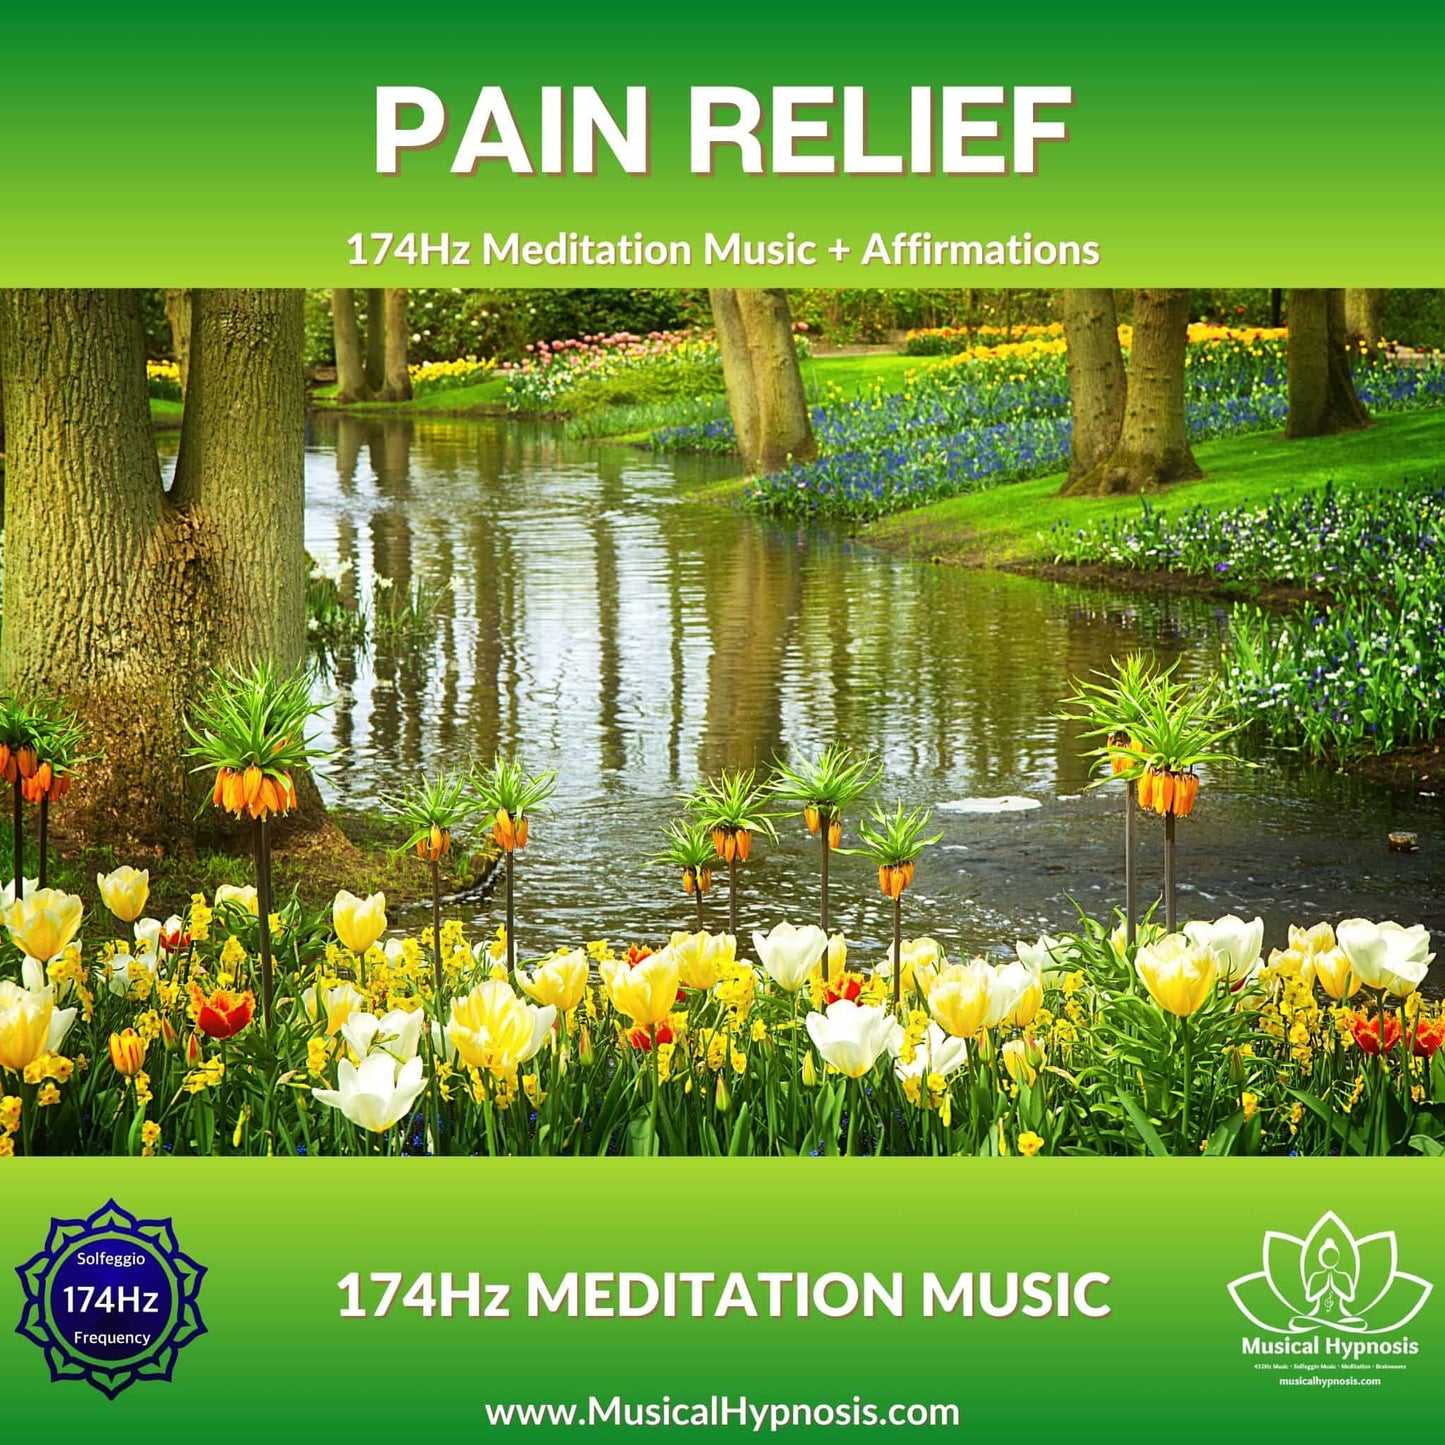 PAIN RELIEF • 174Hz MEDITATION MUSIC + AFFIRMATIONS